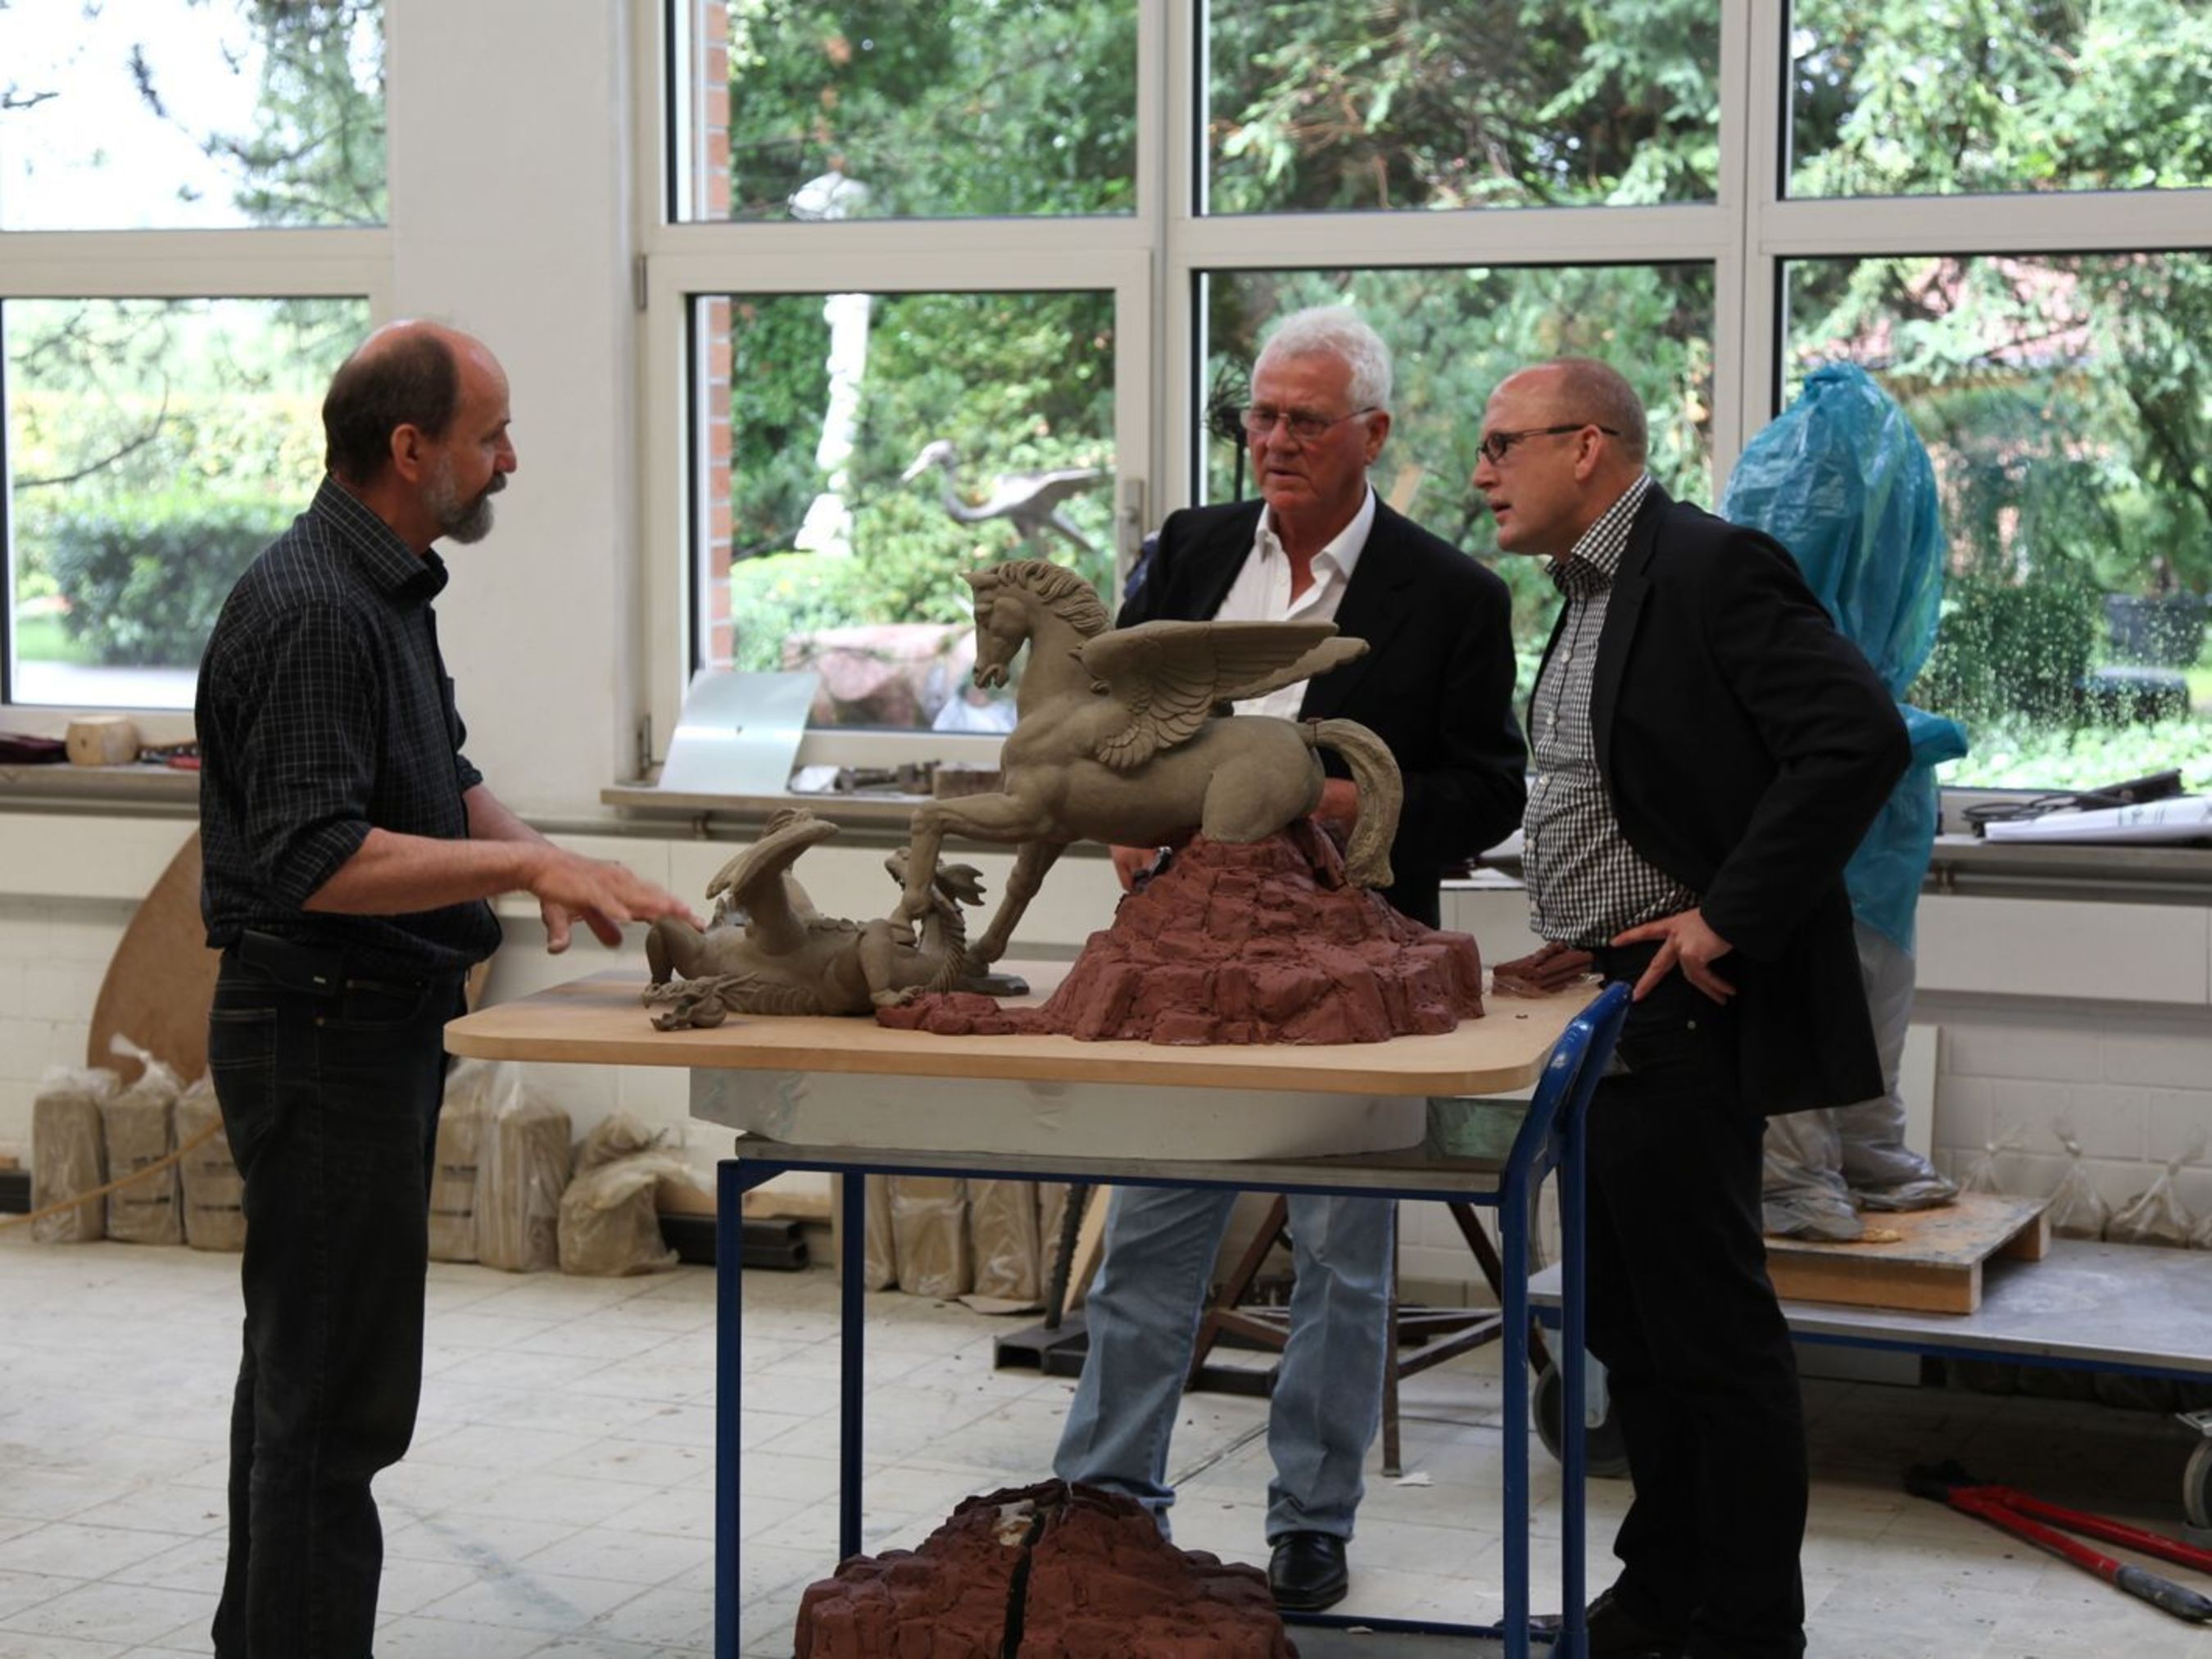 Complete Sculpture of Pegasus and Dragon / Frank Stronach (middle) with Guenter Czasny, deputy managing director from Strassacker, in a conversation with the academic sculptor Waldemar Schroeder (left) at Strassacker workshops. (PRNewsFoto/The Strassacker art foundry)